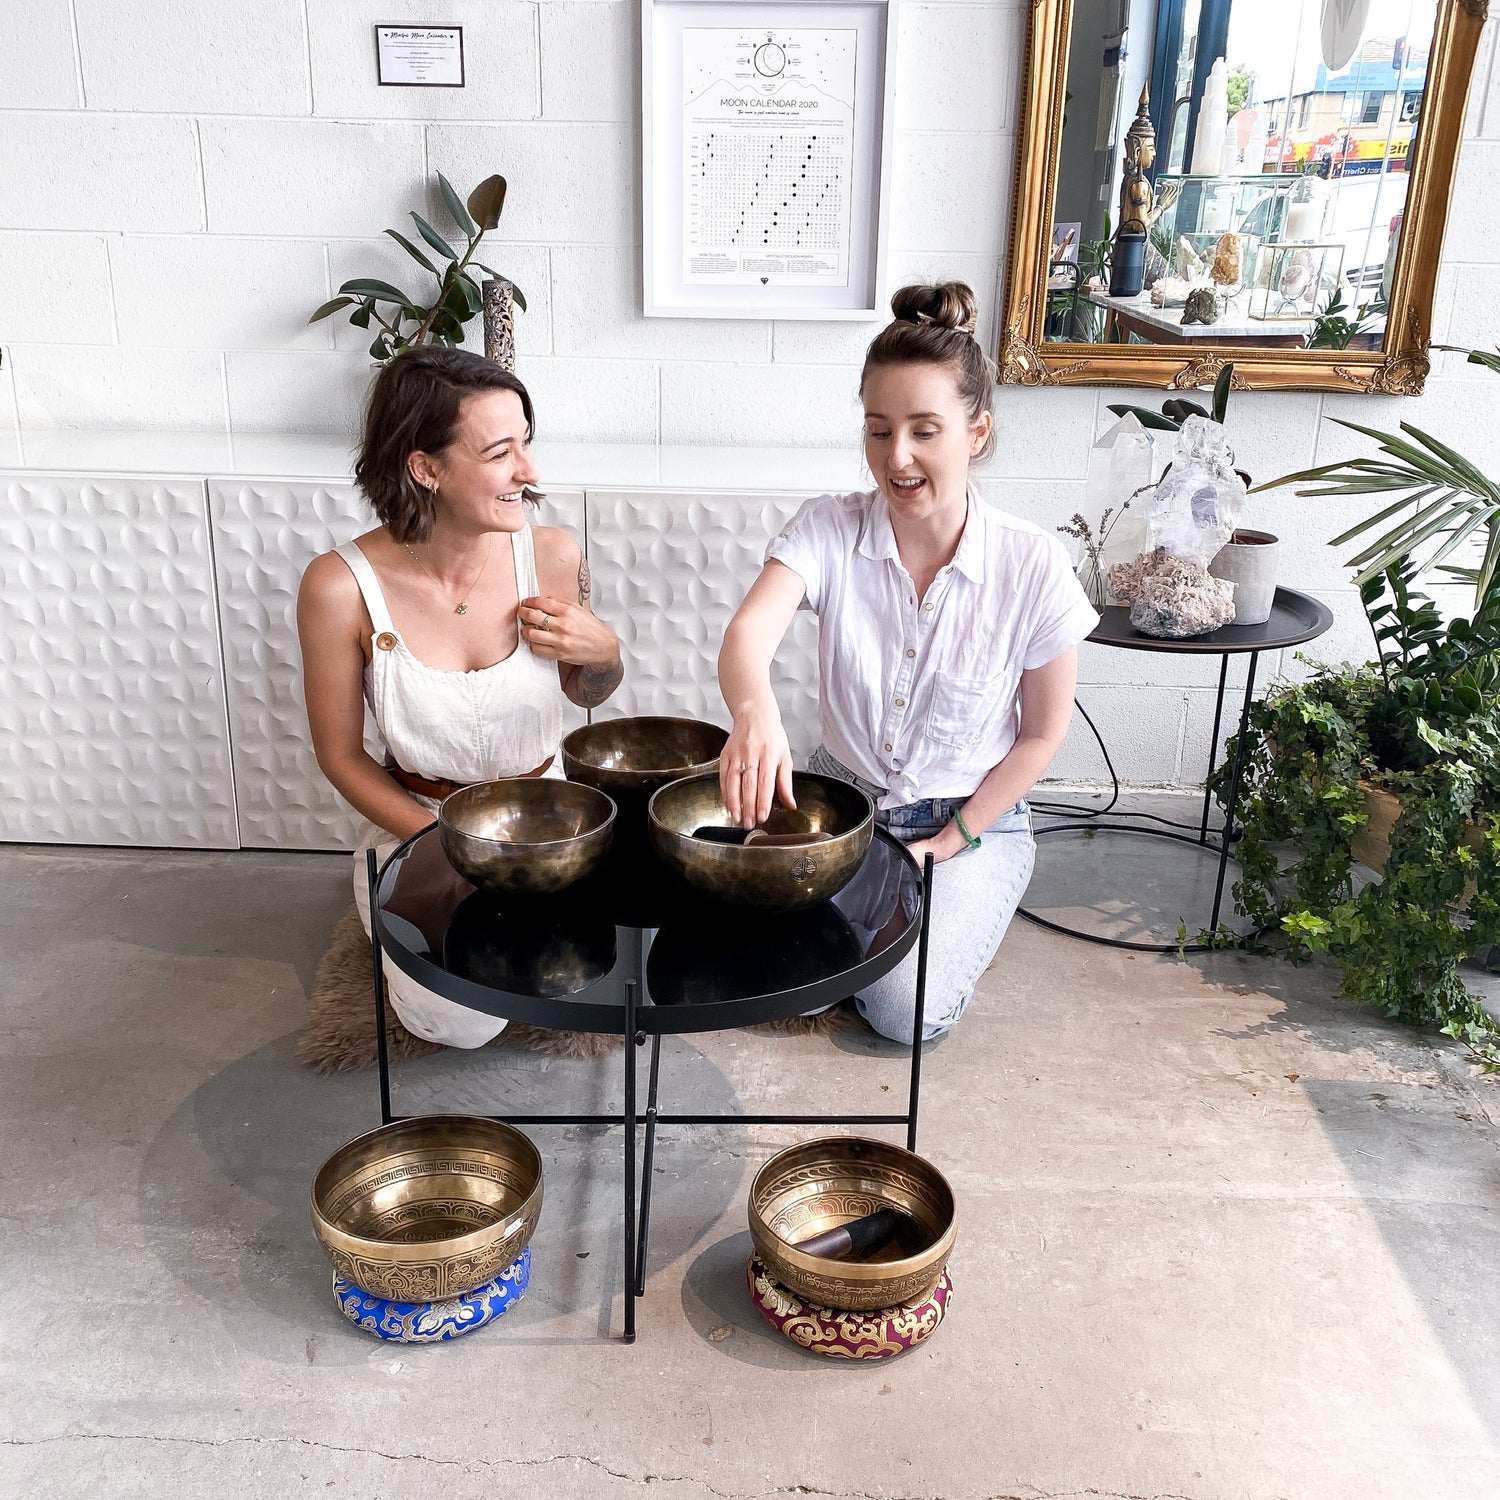 The Science Behind Sound Healing with Tibetan Singing Bowls